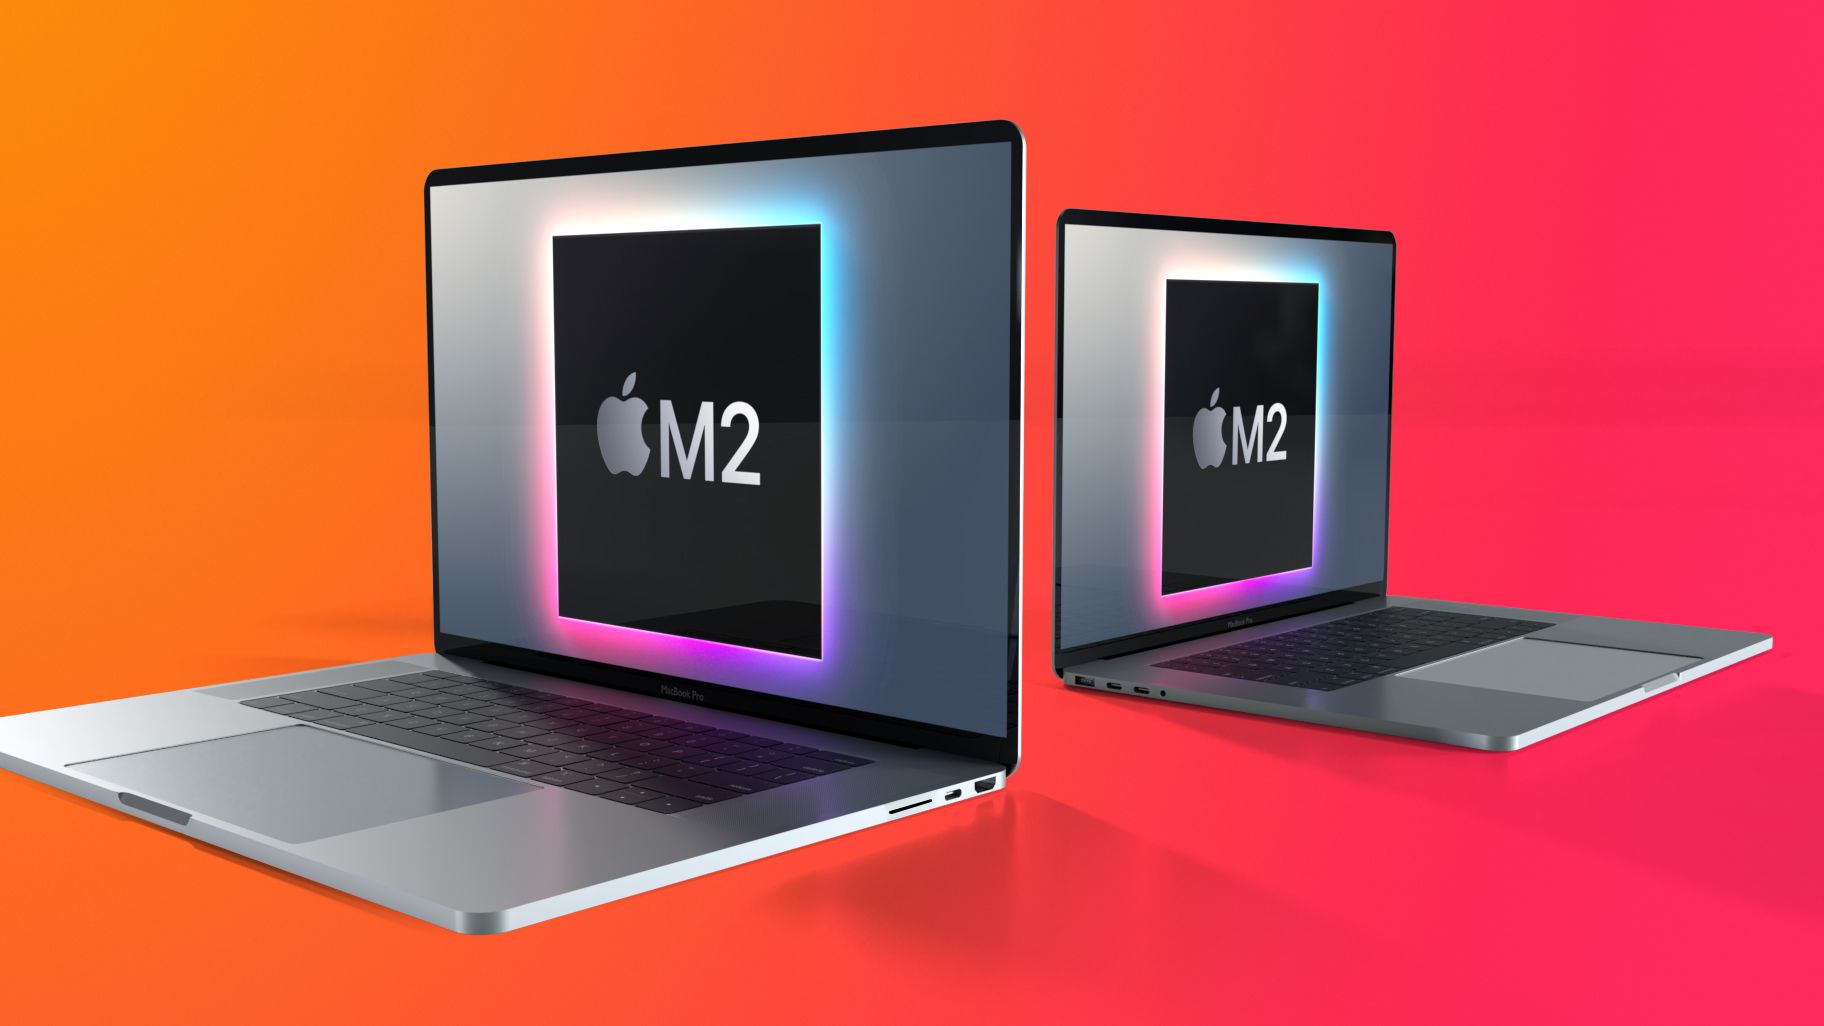 M2 MacBook 7 new features must give you great impression! RedTom